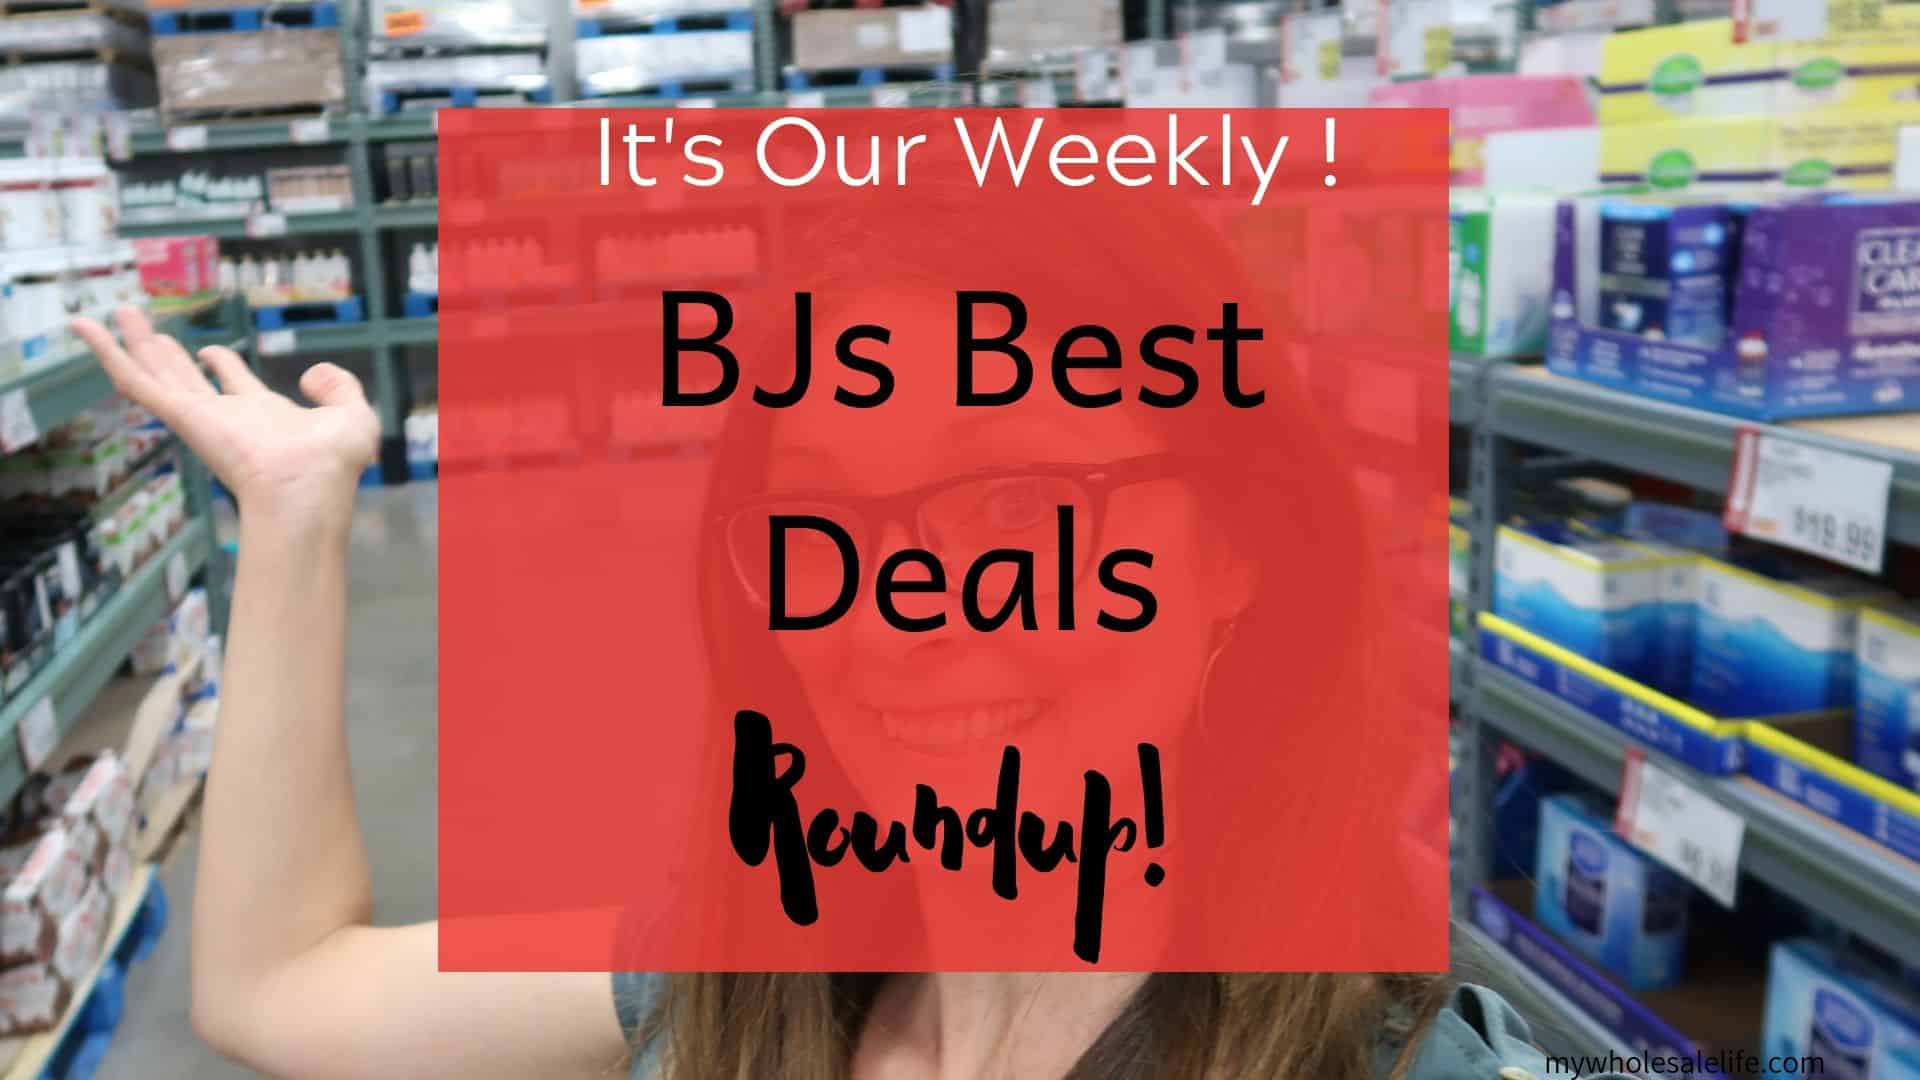 BJ’s Best Deals for The Week Roundup!